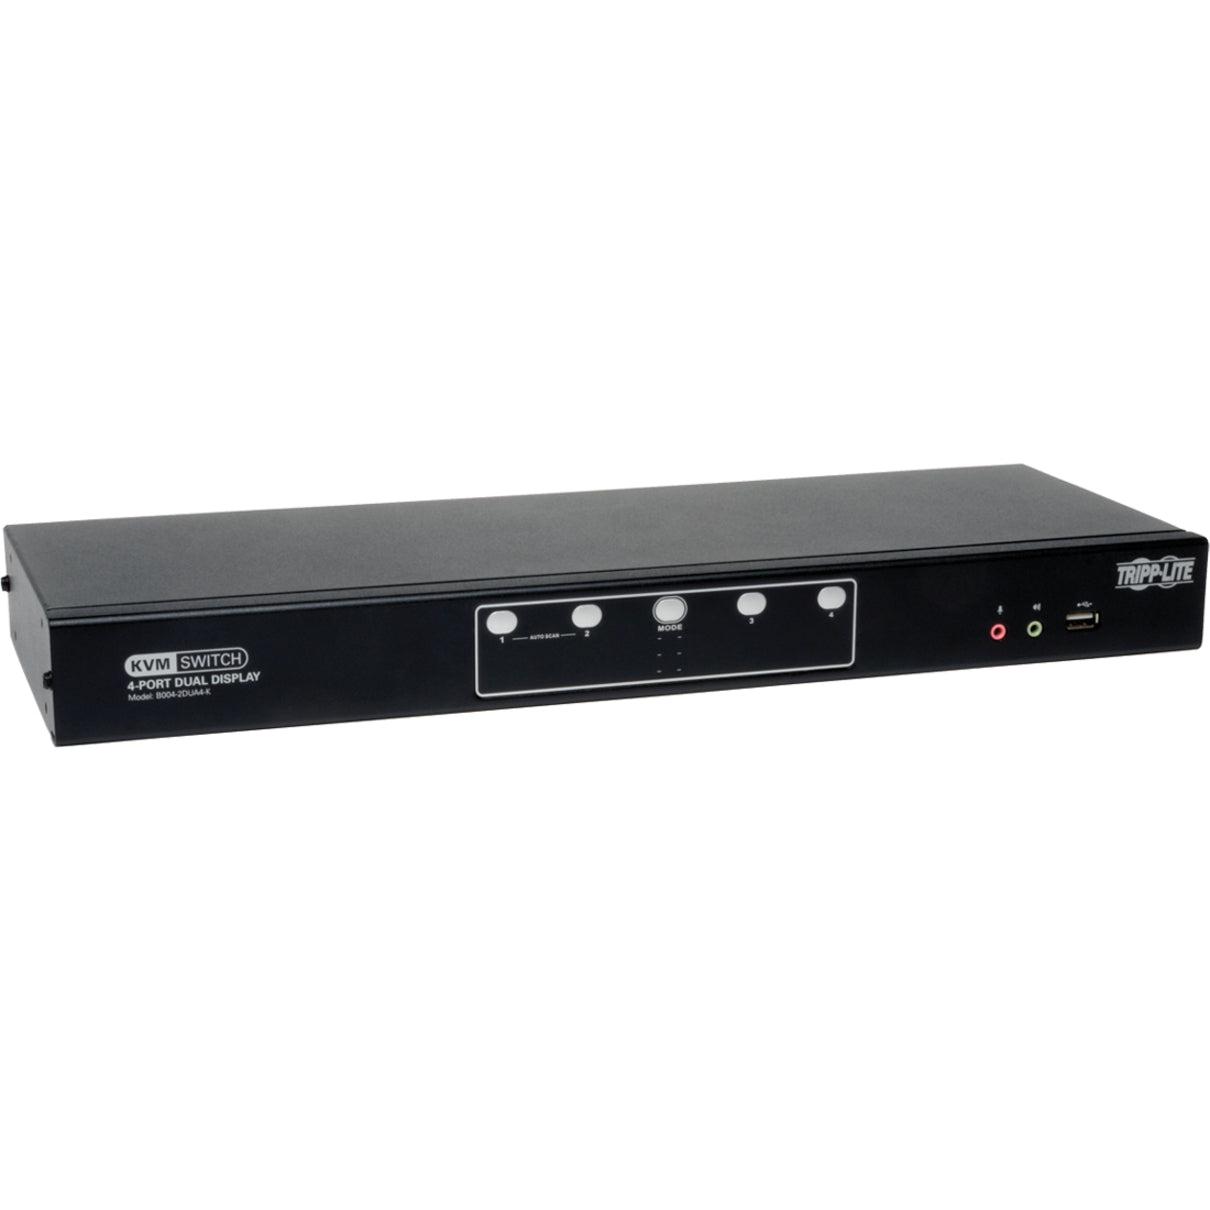 Tripp Lite B004-2DUA4-K 4-Port Dual Monitor DVI KVM Switch with Audio and USB 2.0 Hub Cables included